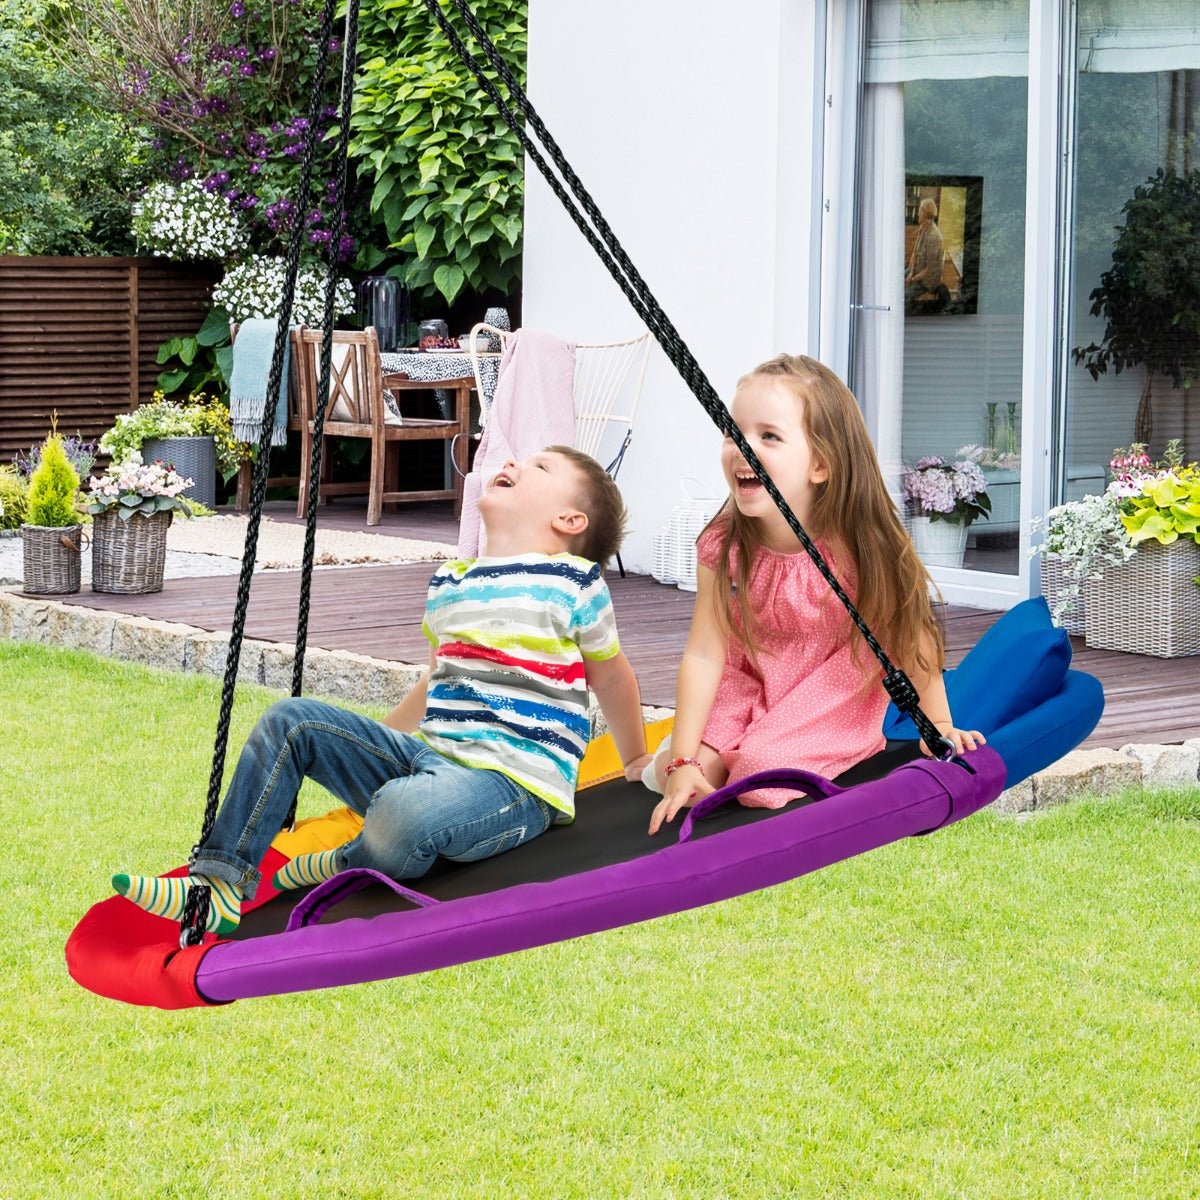 colourful Outdoor Tree Swing: Round Platform with Cozy Pillow for Kids